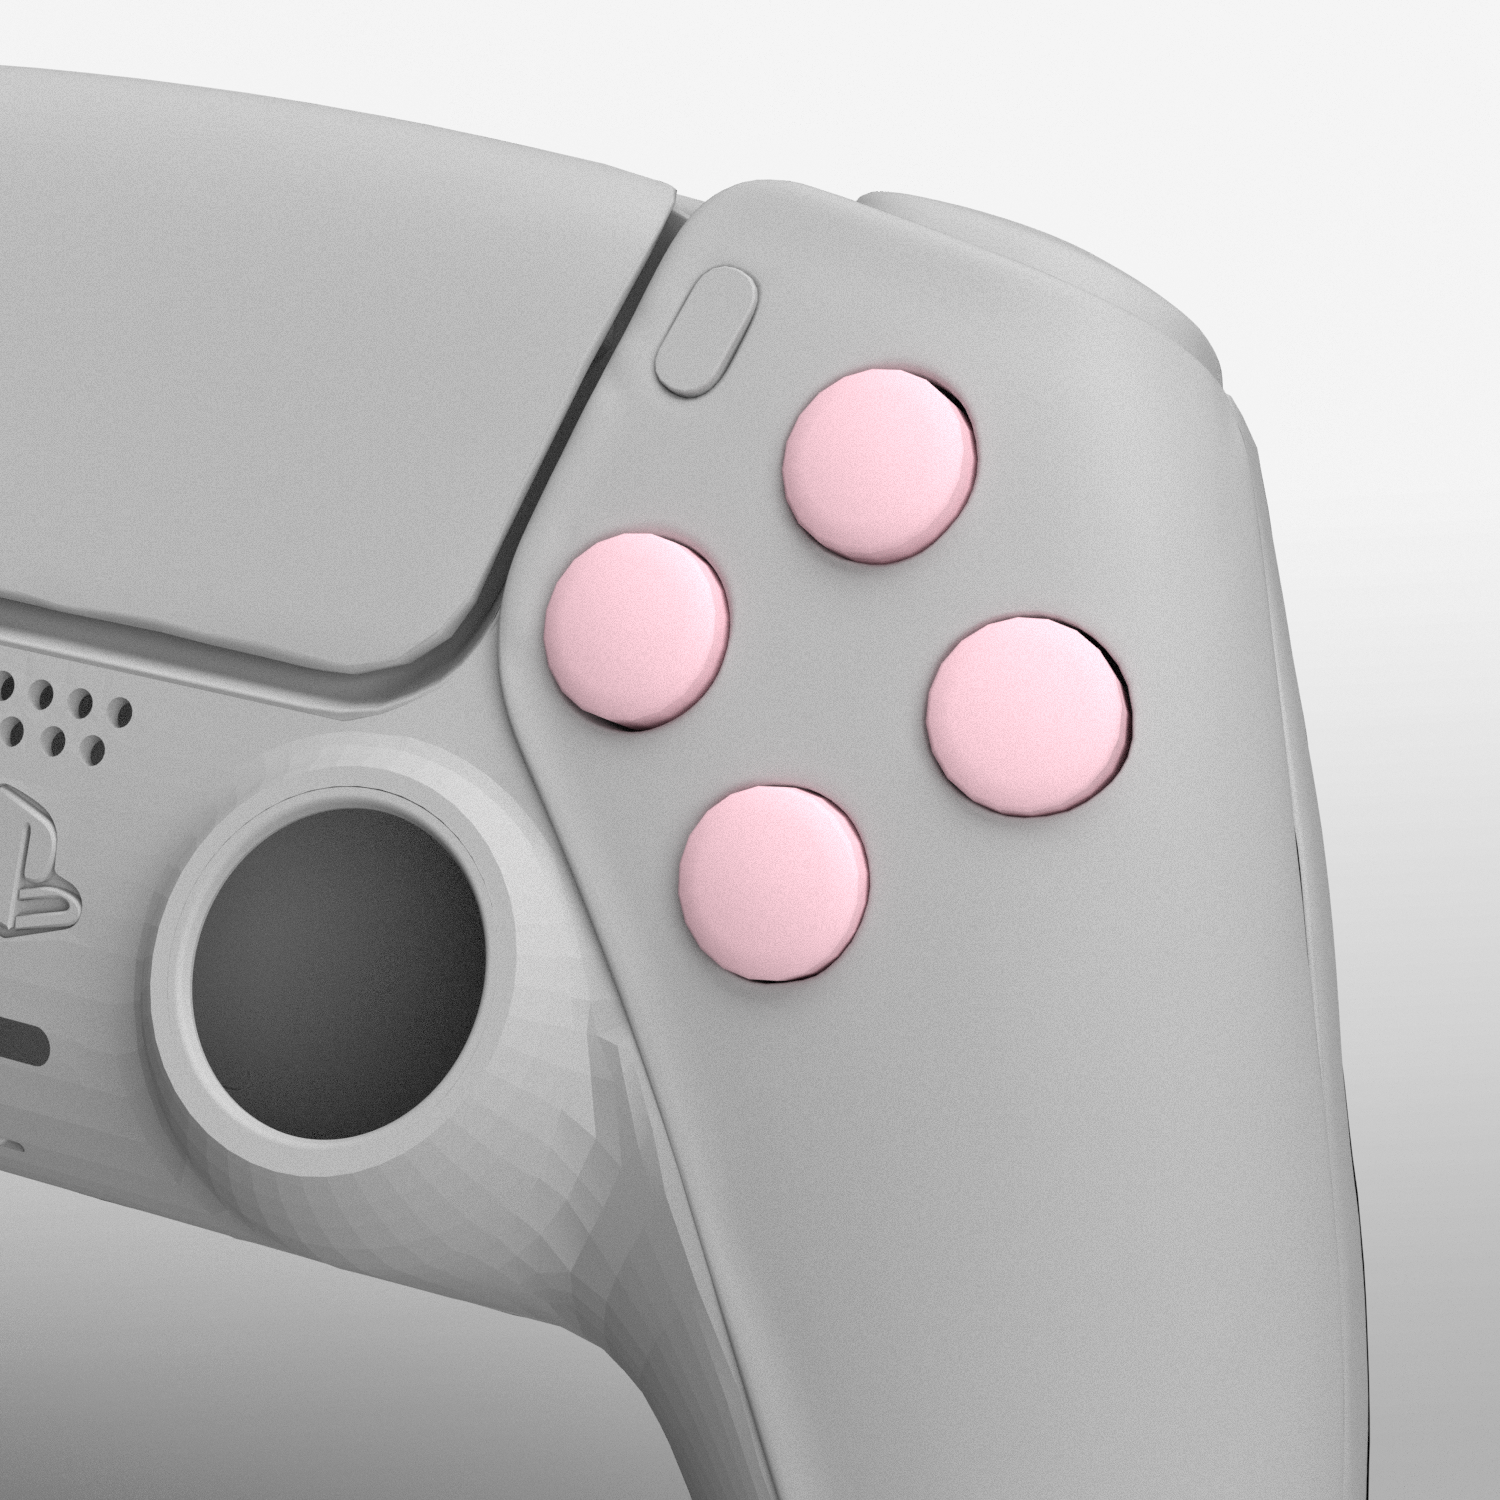 PS5 Soft Touch Face Buttons